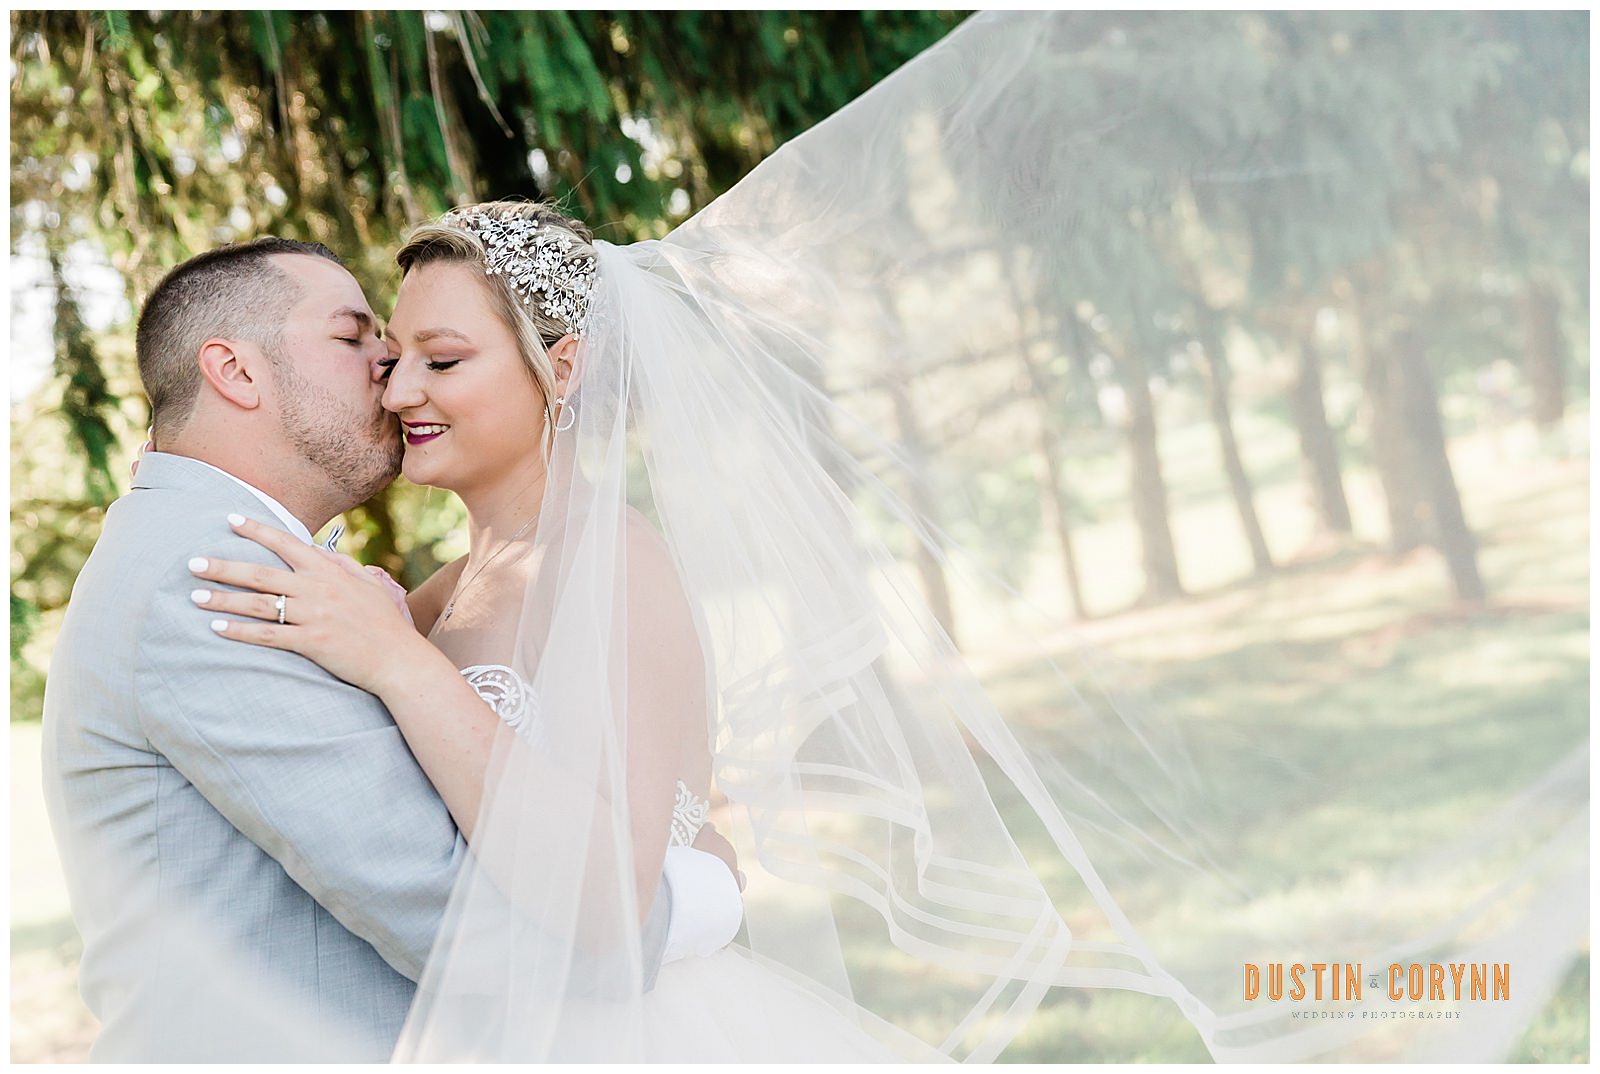 spring wedding posing ideas with bride holding her groom as her veil flows in the wind